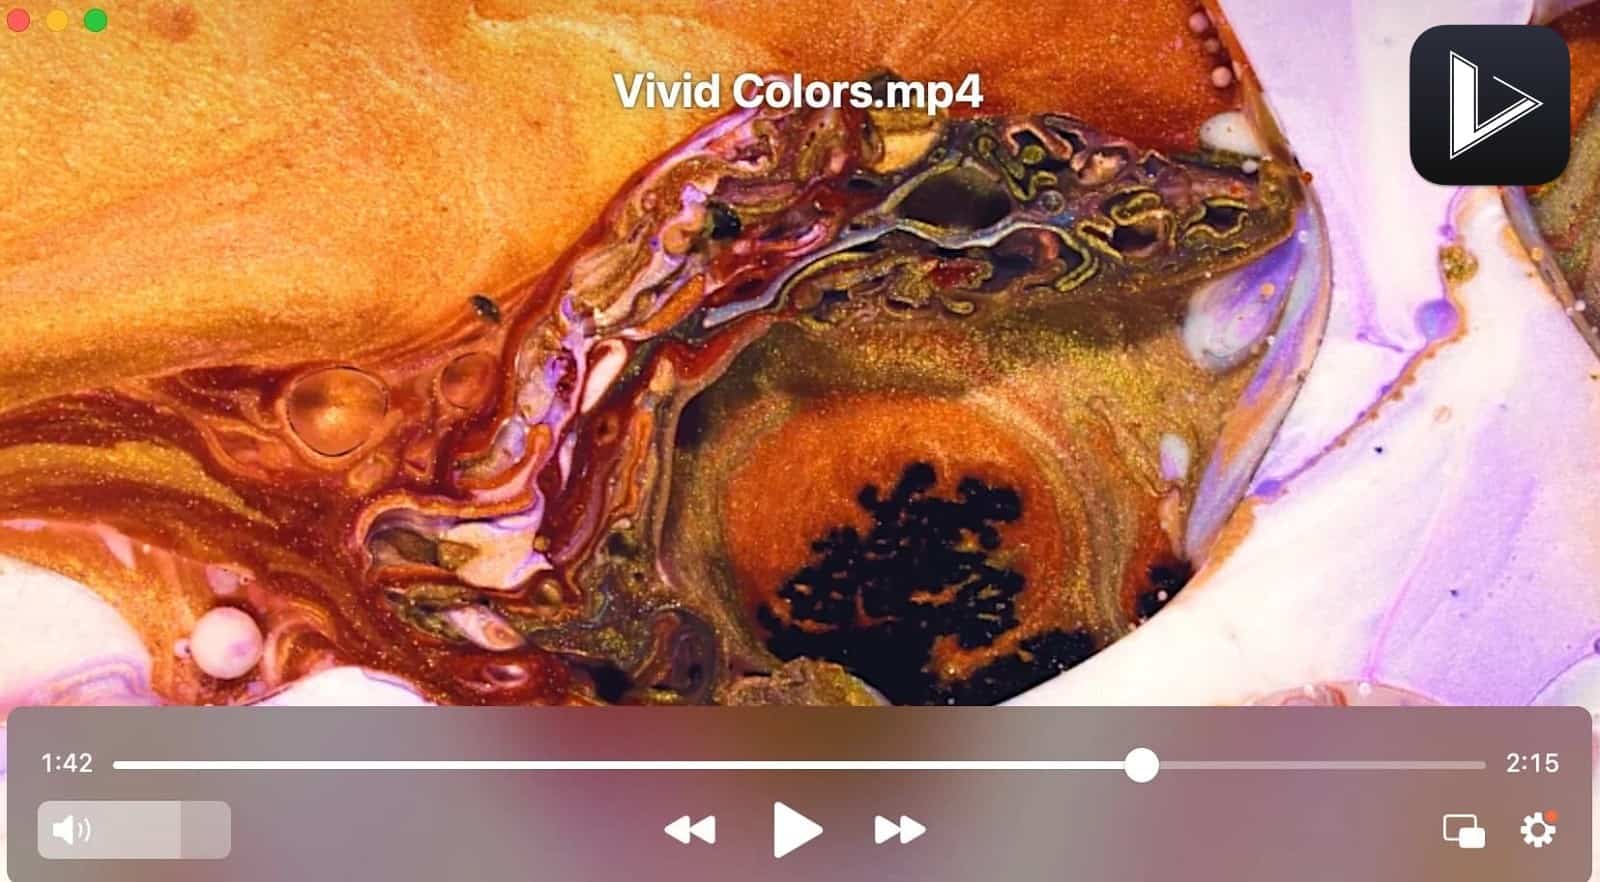 You can set lightweight macOS video player as default video player